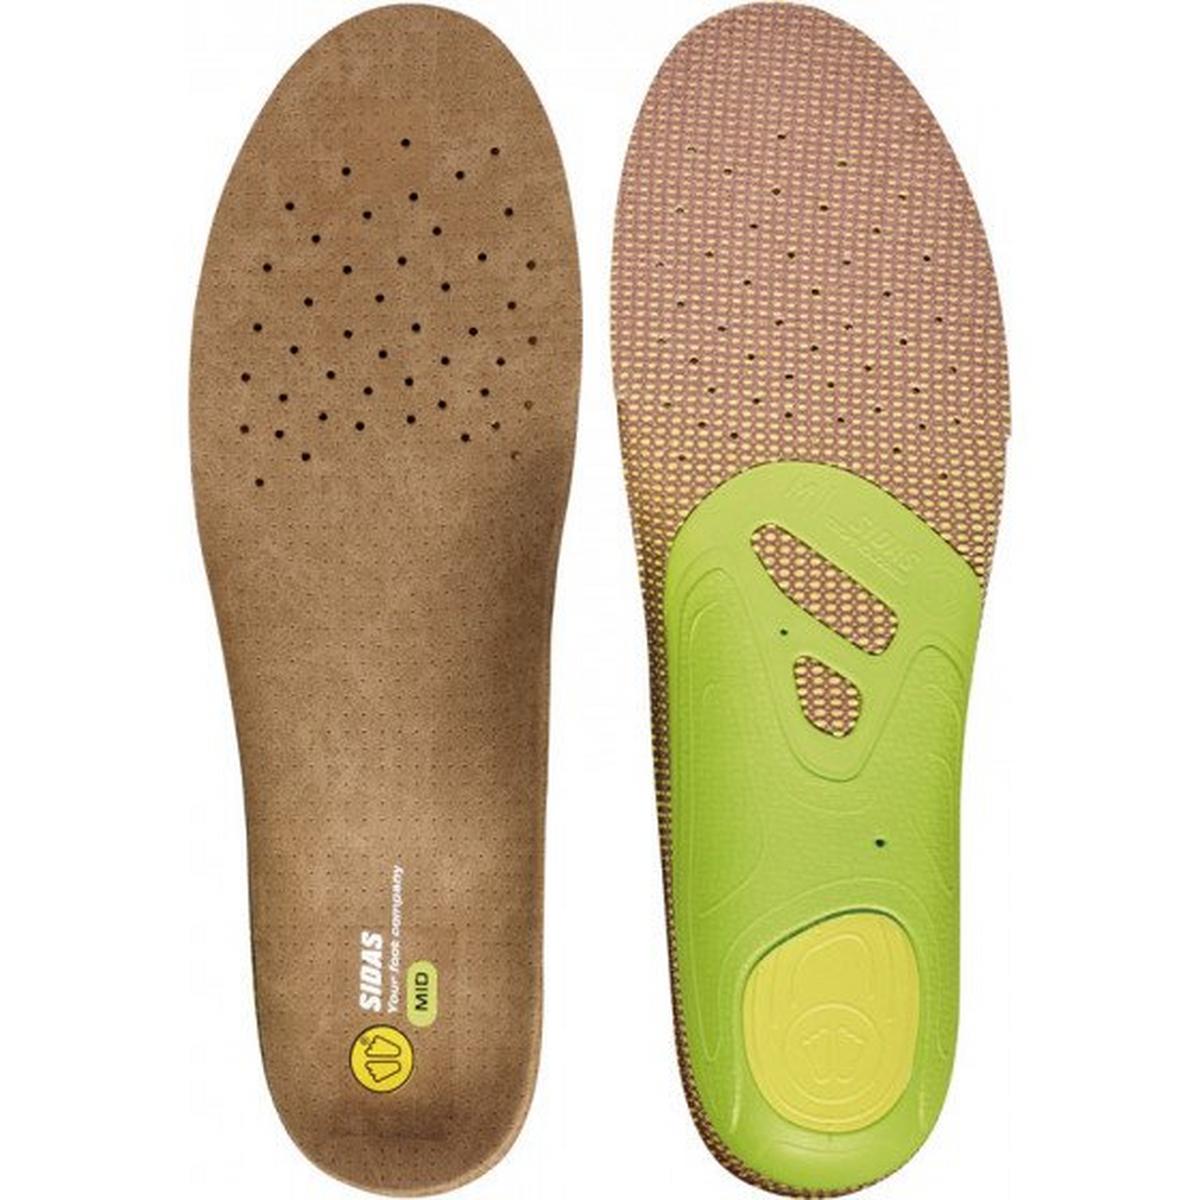 Sidas 3Feet Outdoor Mid Hiking Insoles